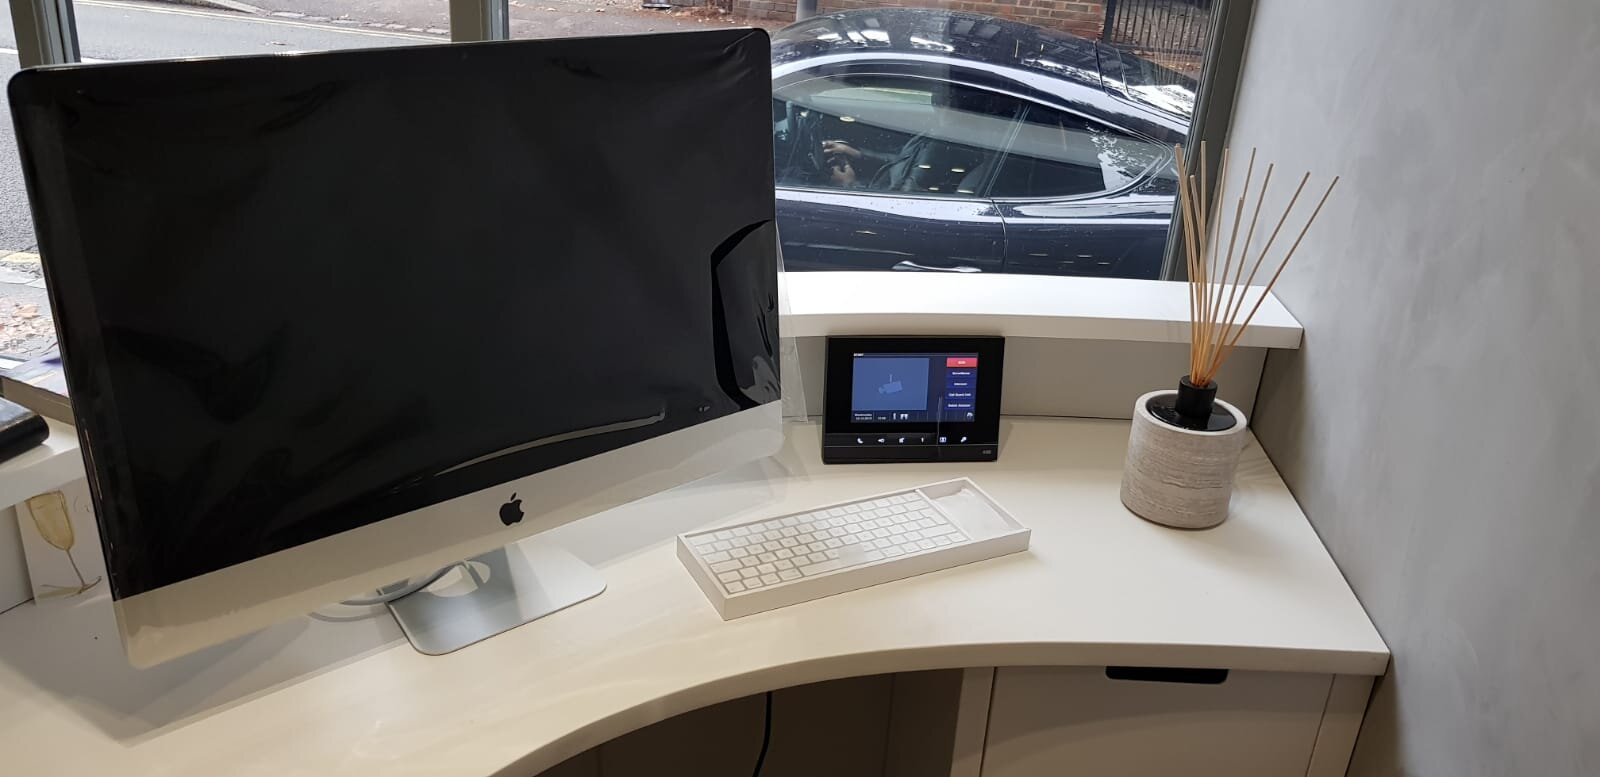 View of desk with iMac and tablet